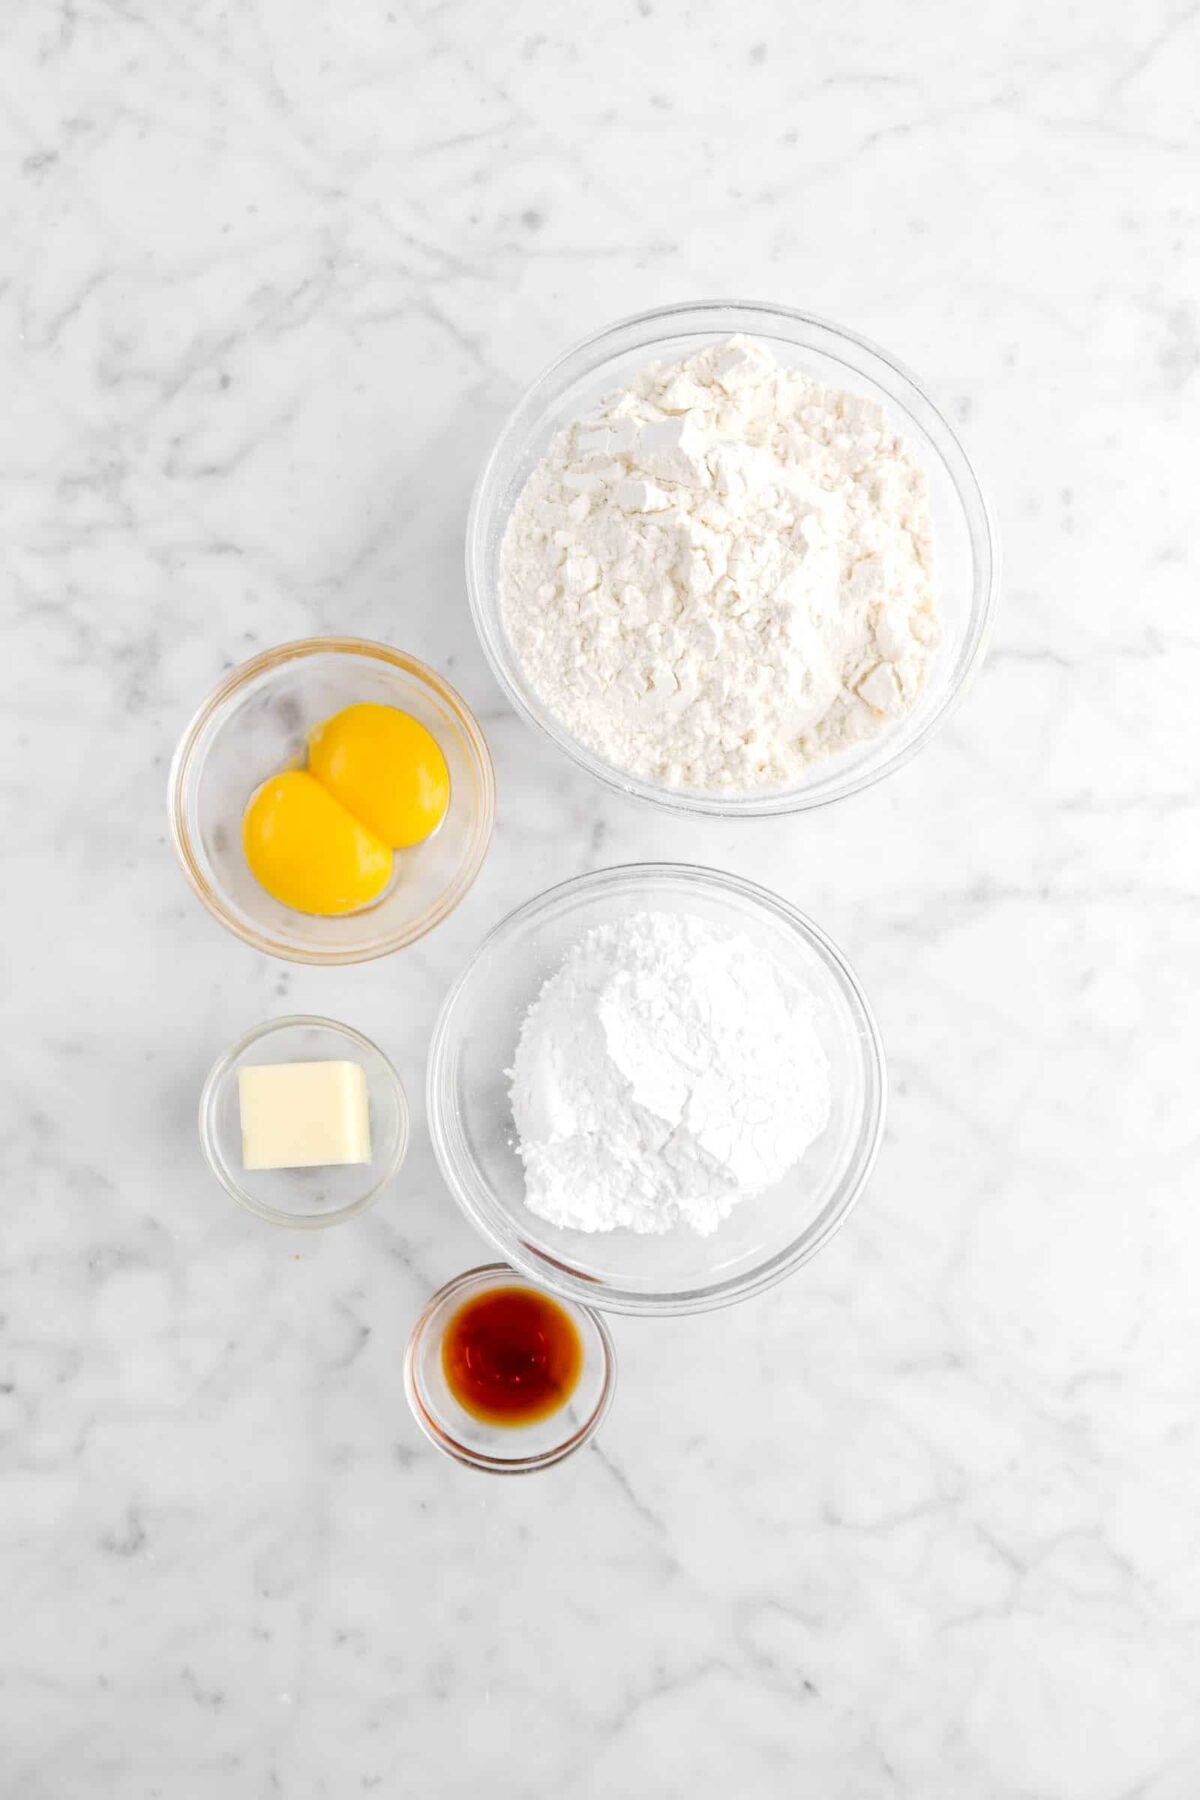 flour, egg yolks, powdered sugar, butter, and vanilla on marble counter